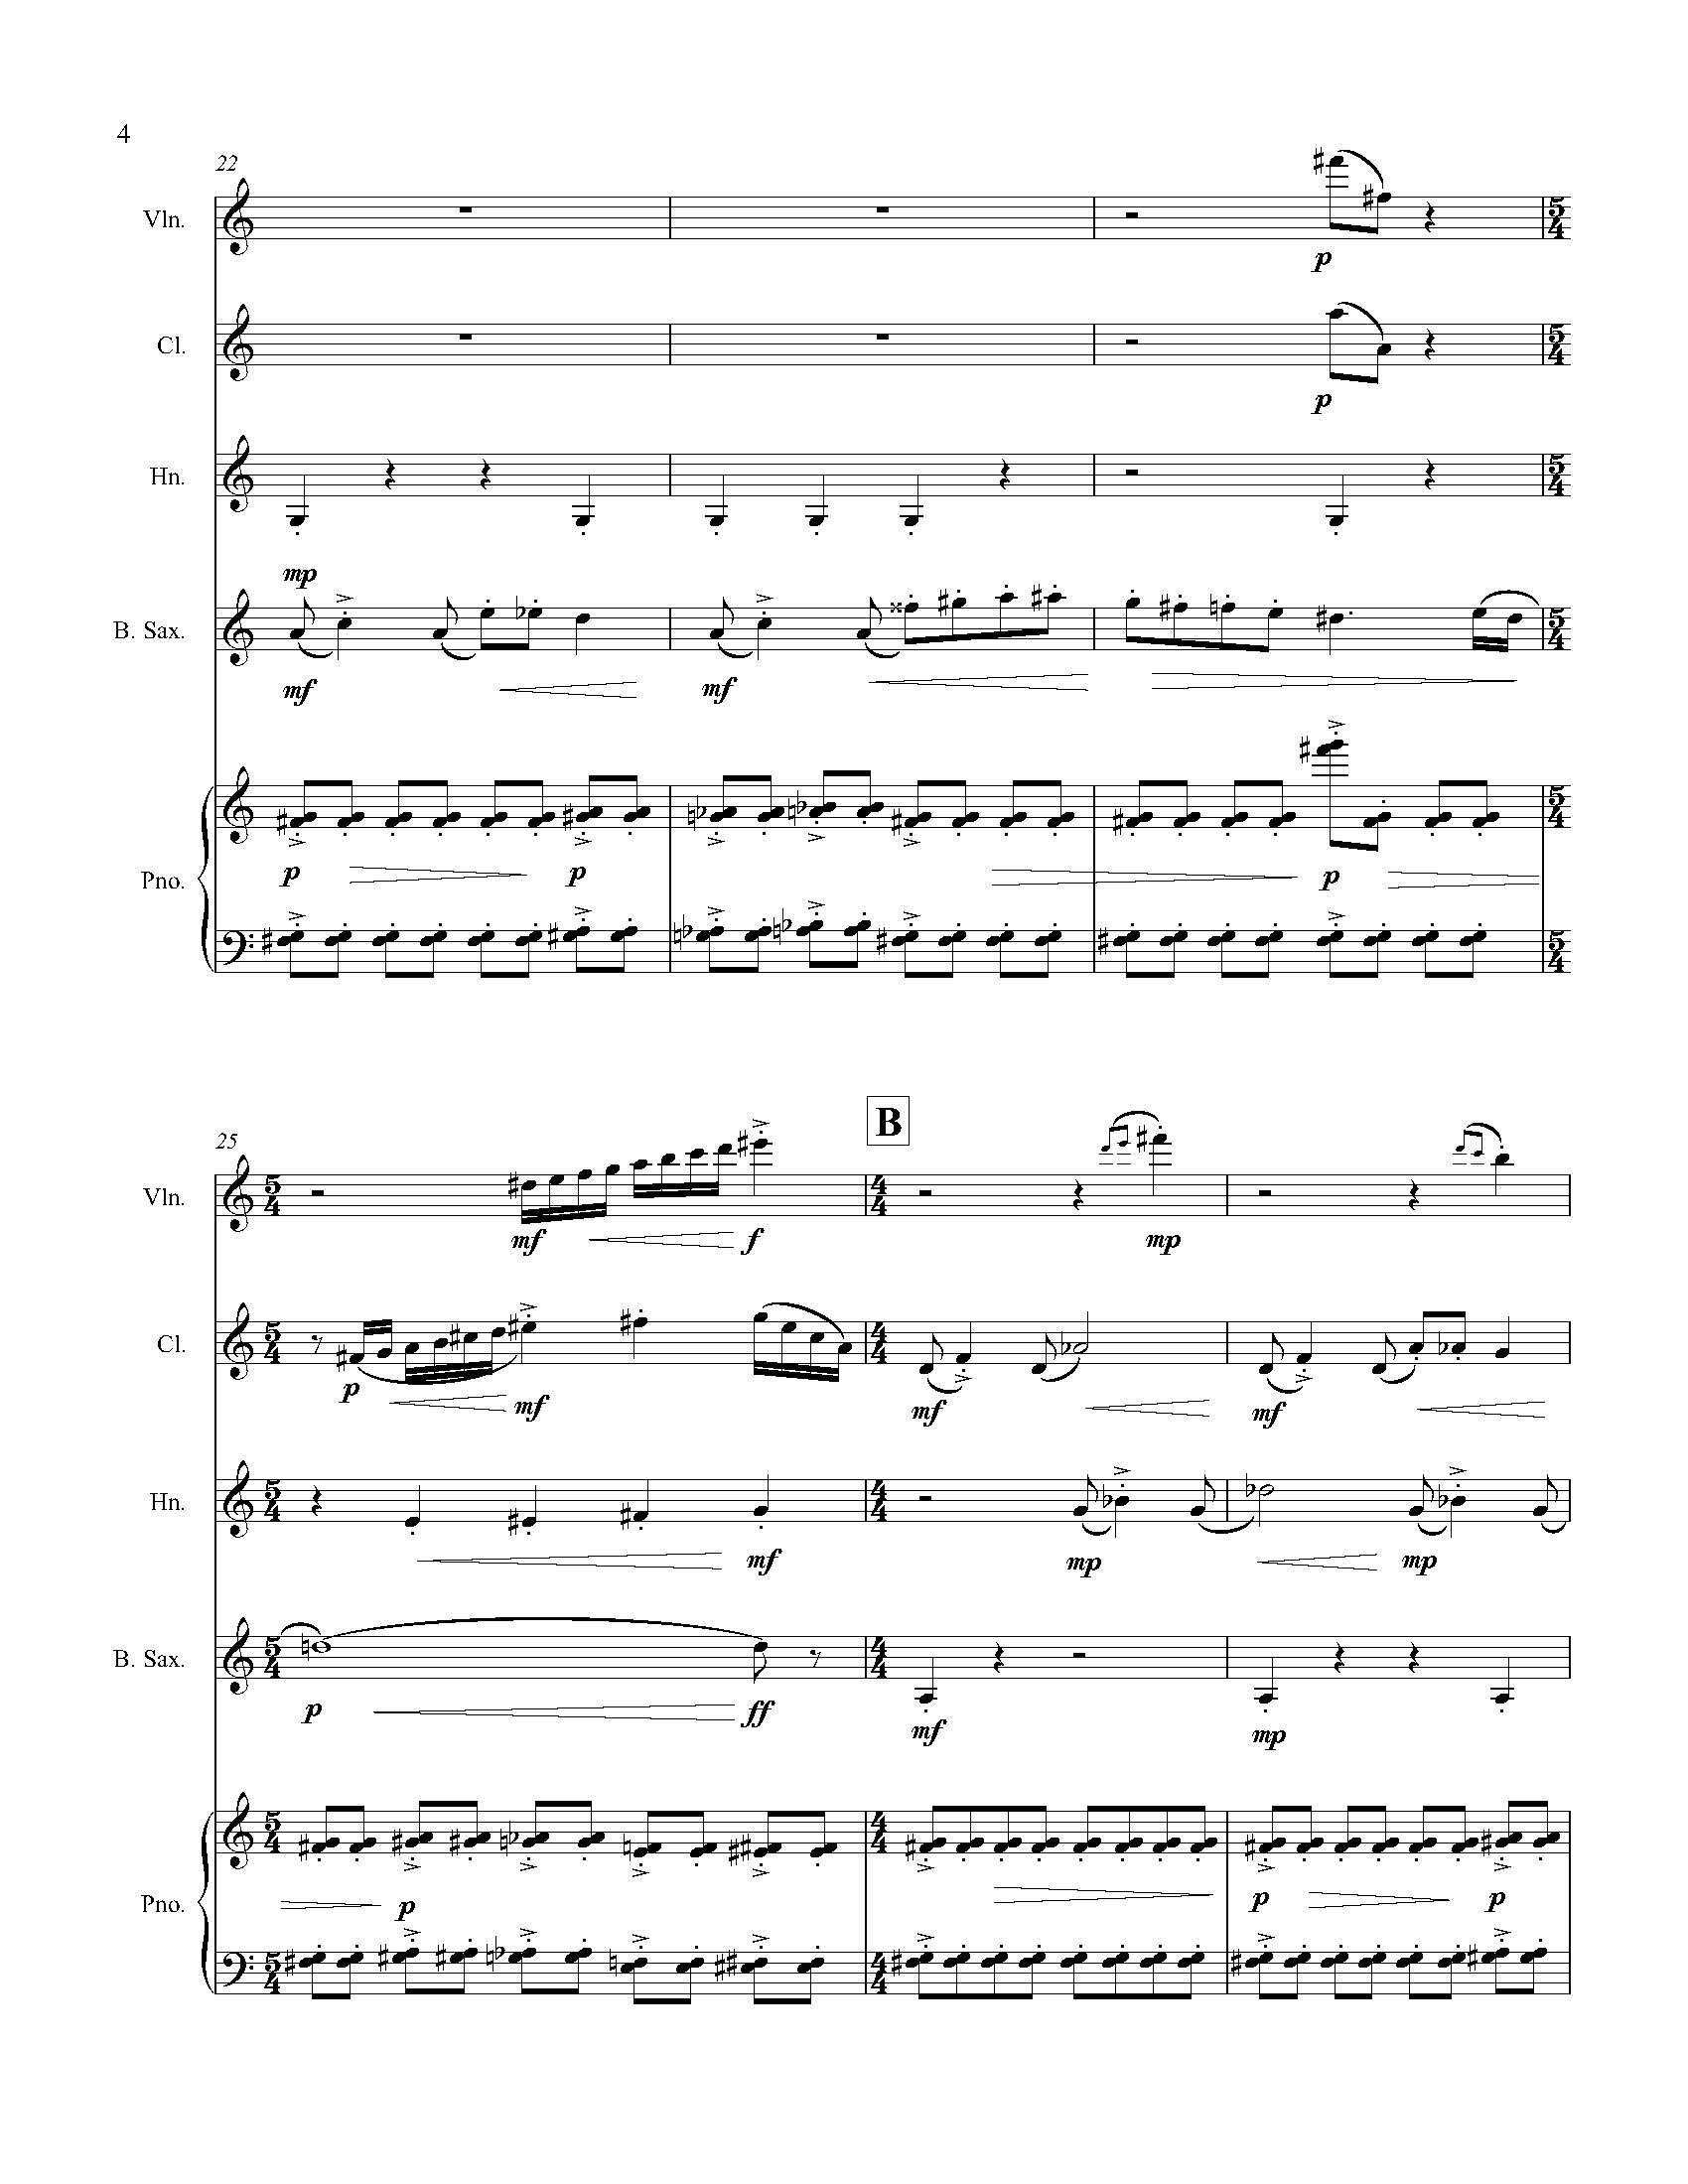 The Outlaw in the Gilded Age - Complete Score_Page_08.jpg